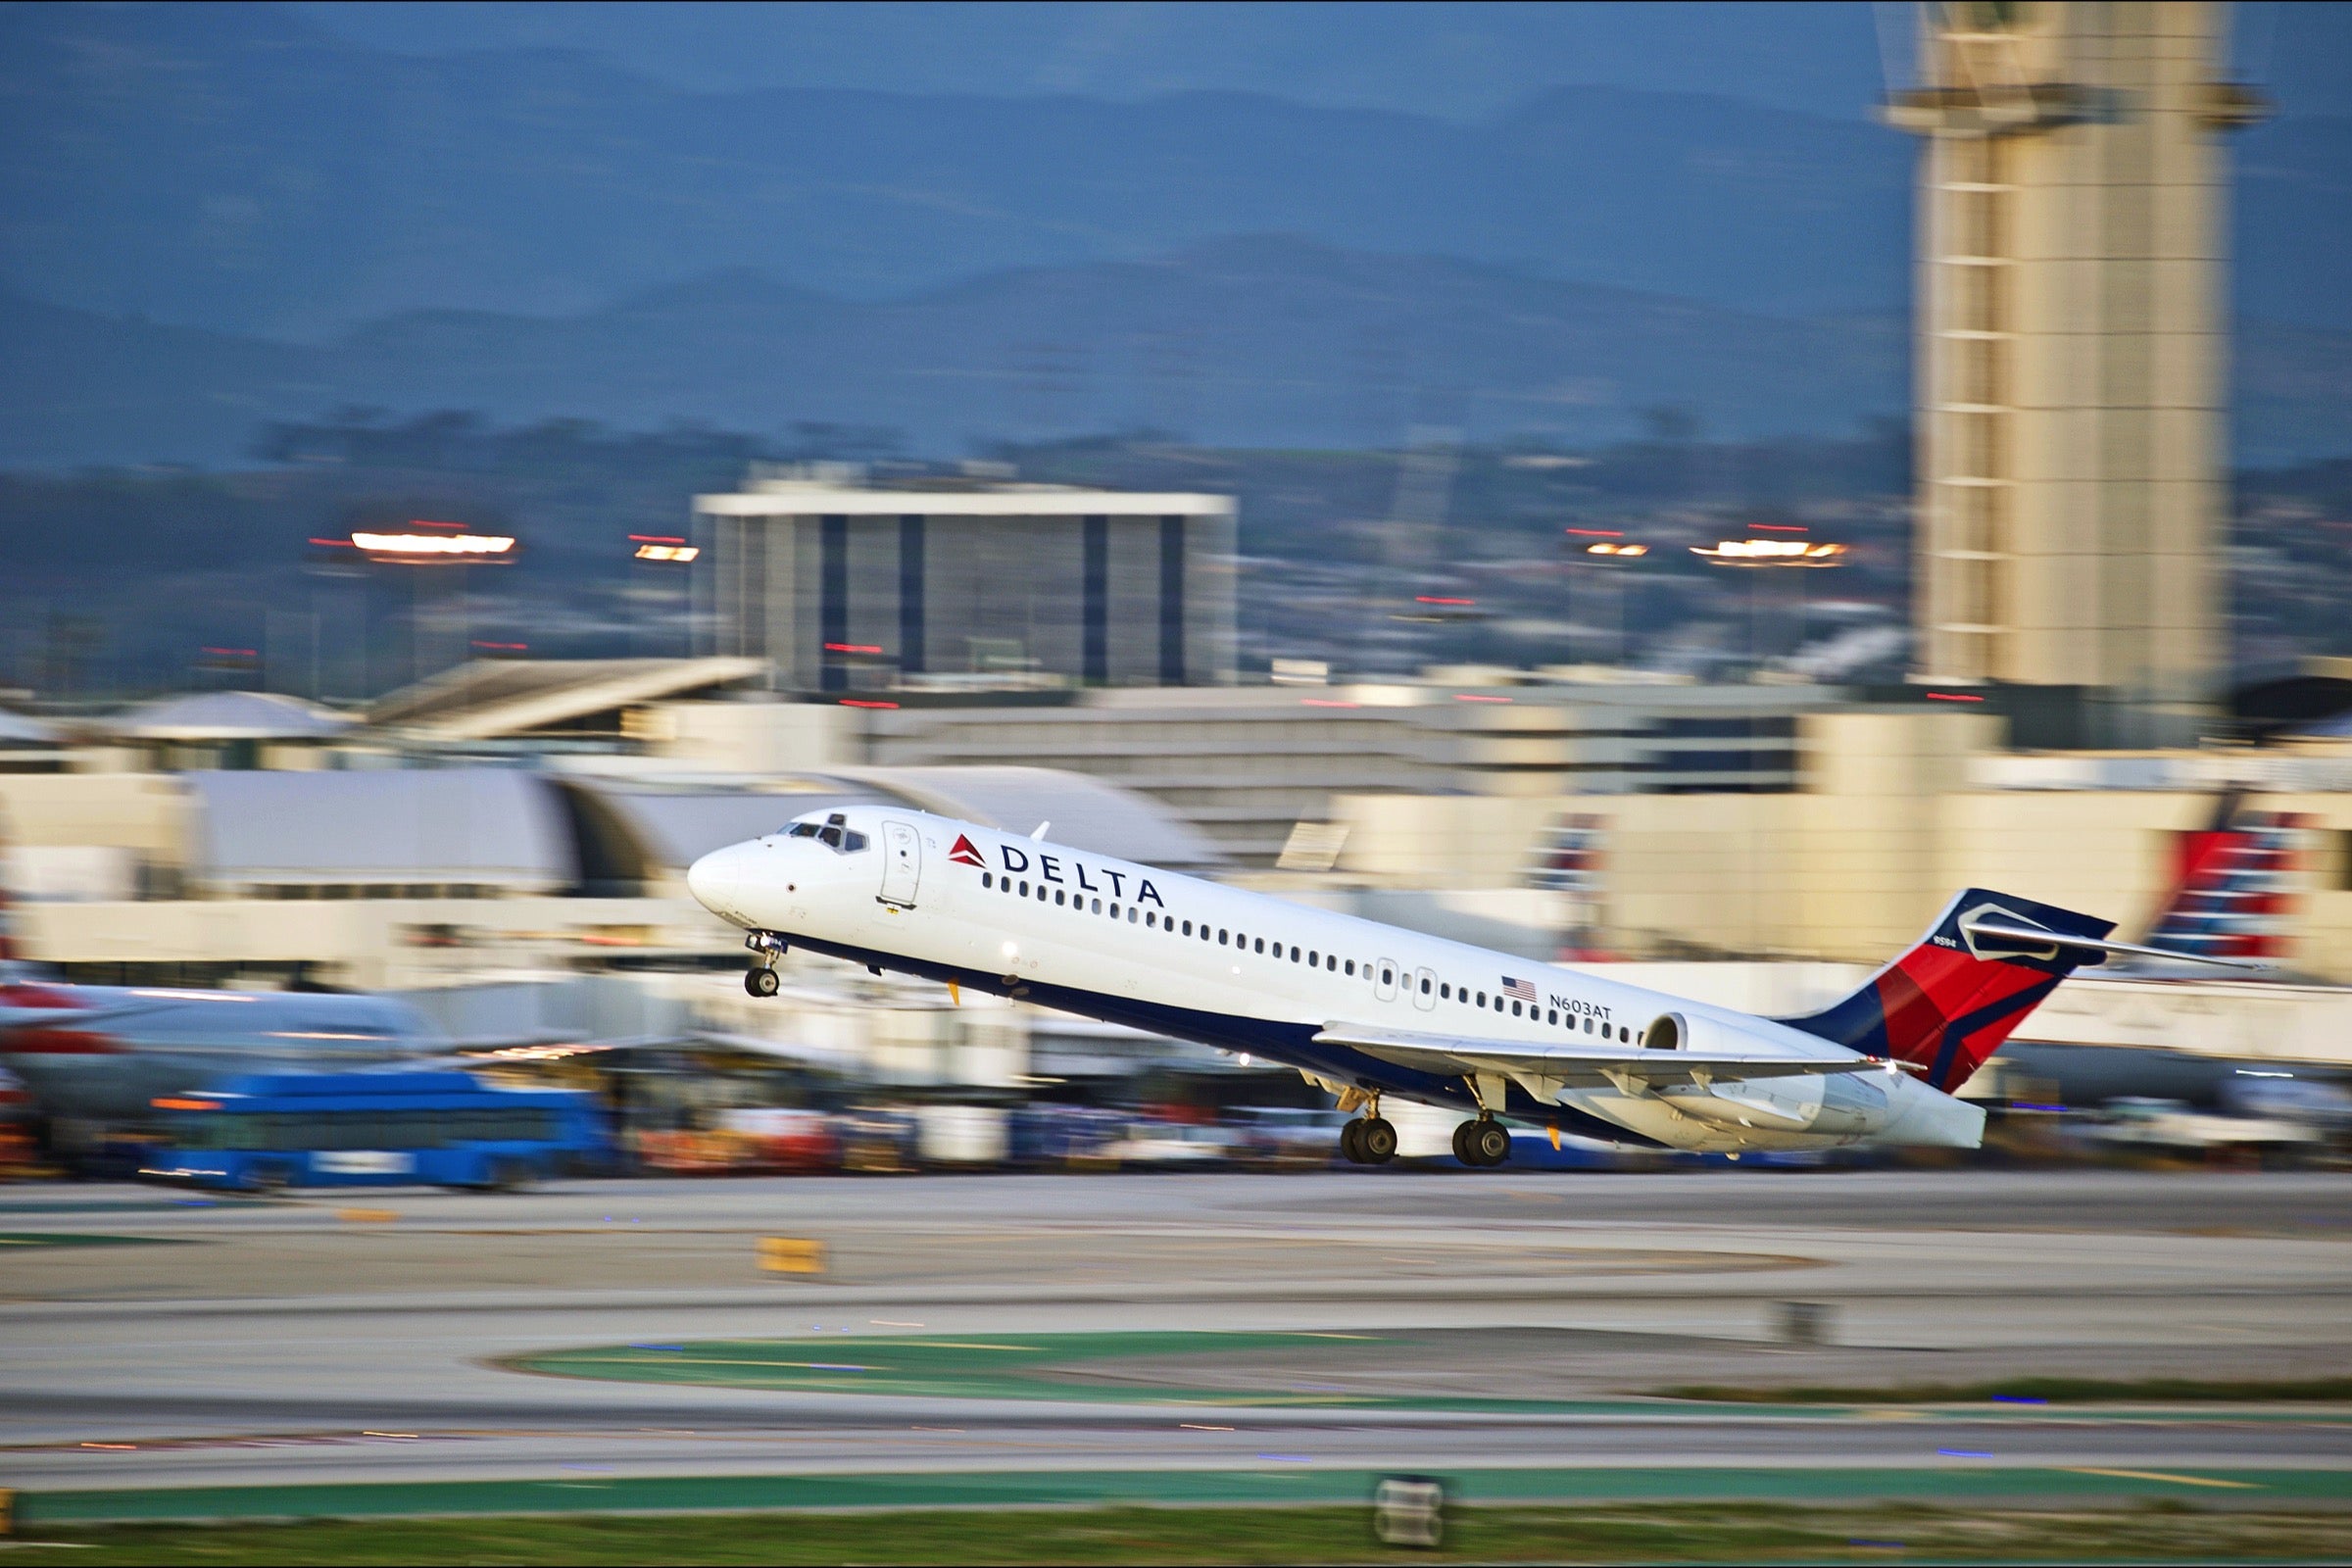 Delta Boeing 717 taking off at LAX